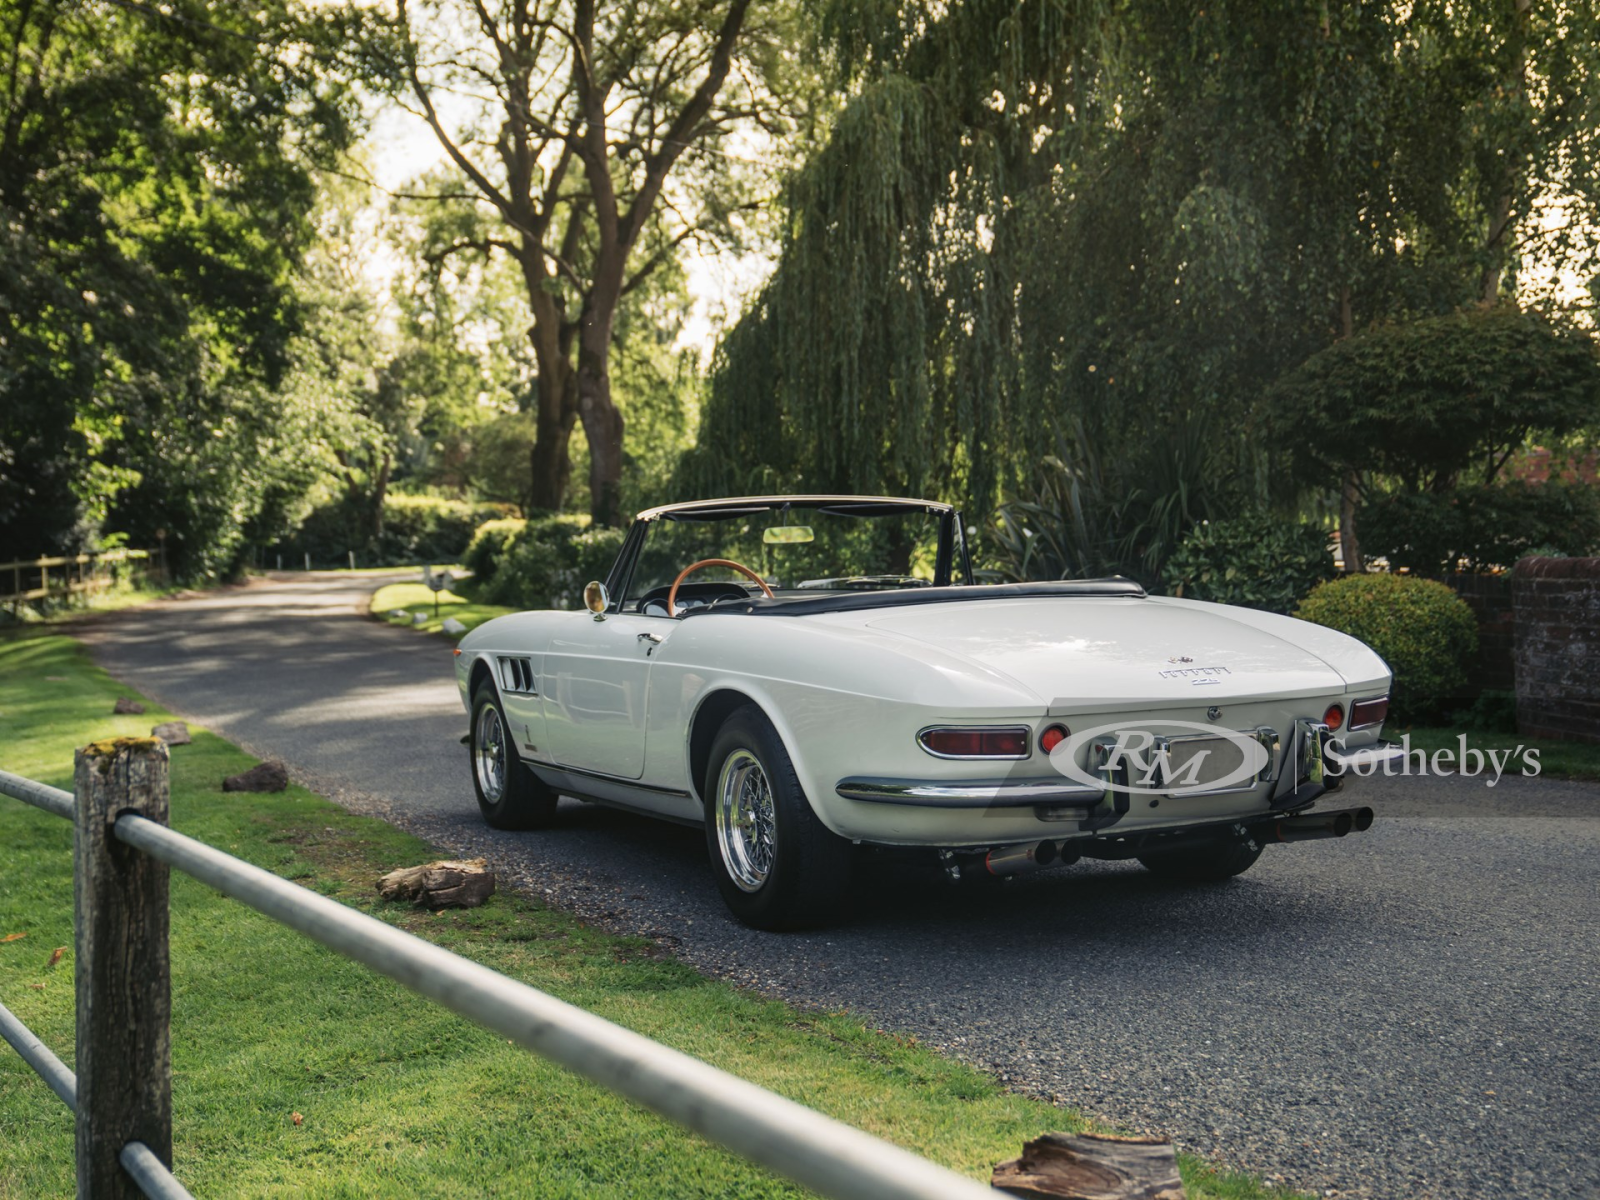 Illustration for article titled The 1966 Ferrari 275 GTS finished in Bianco over Blue...